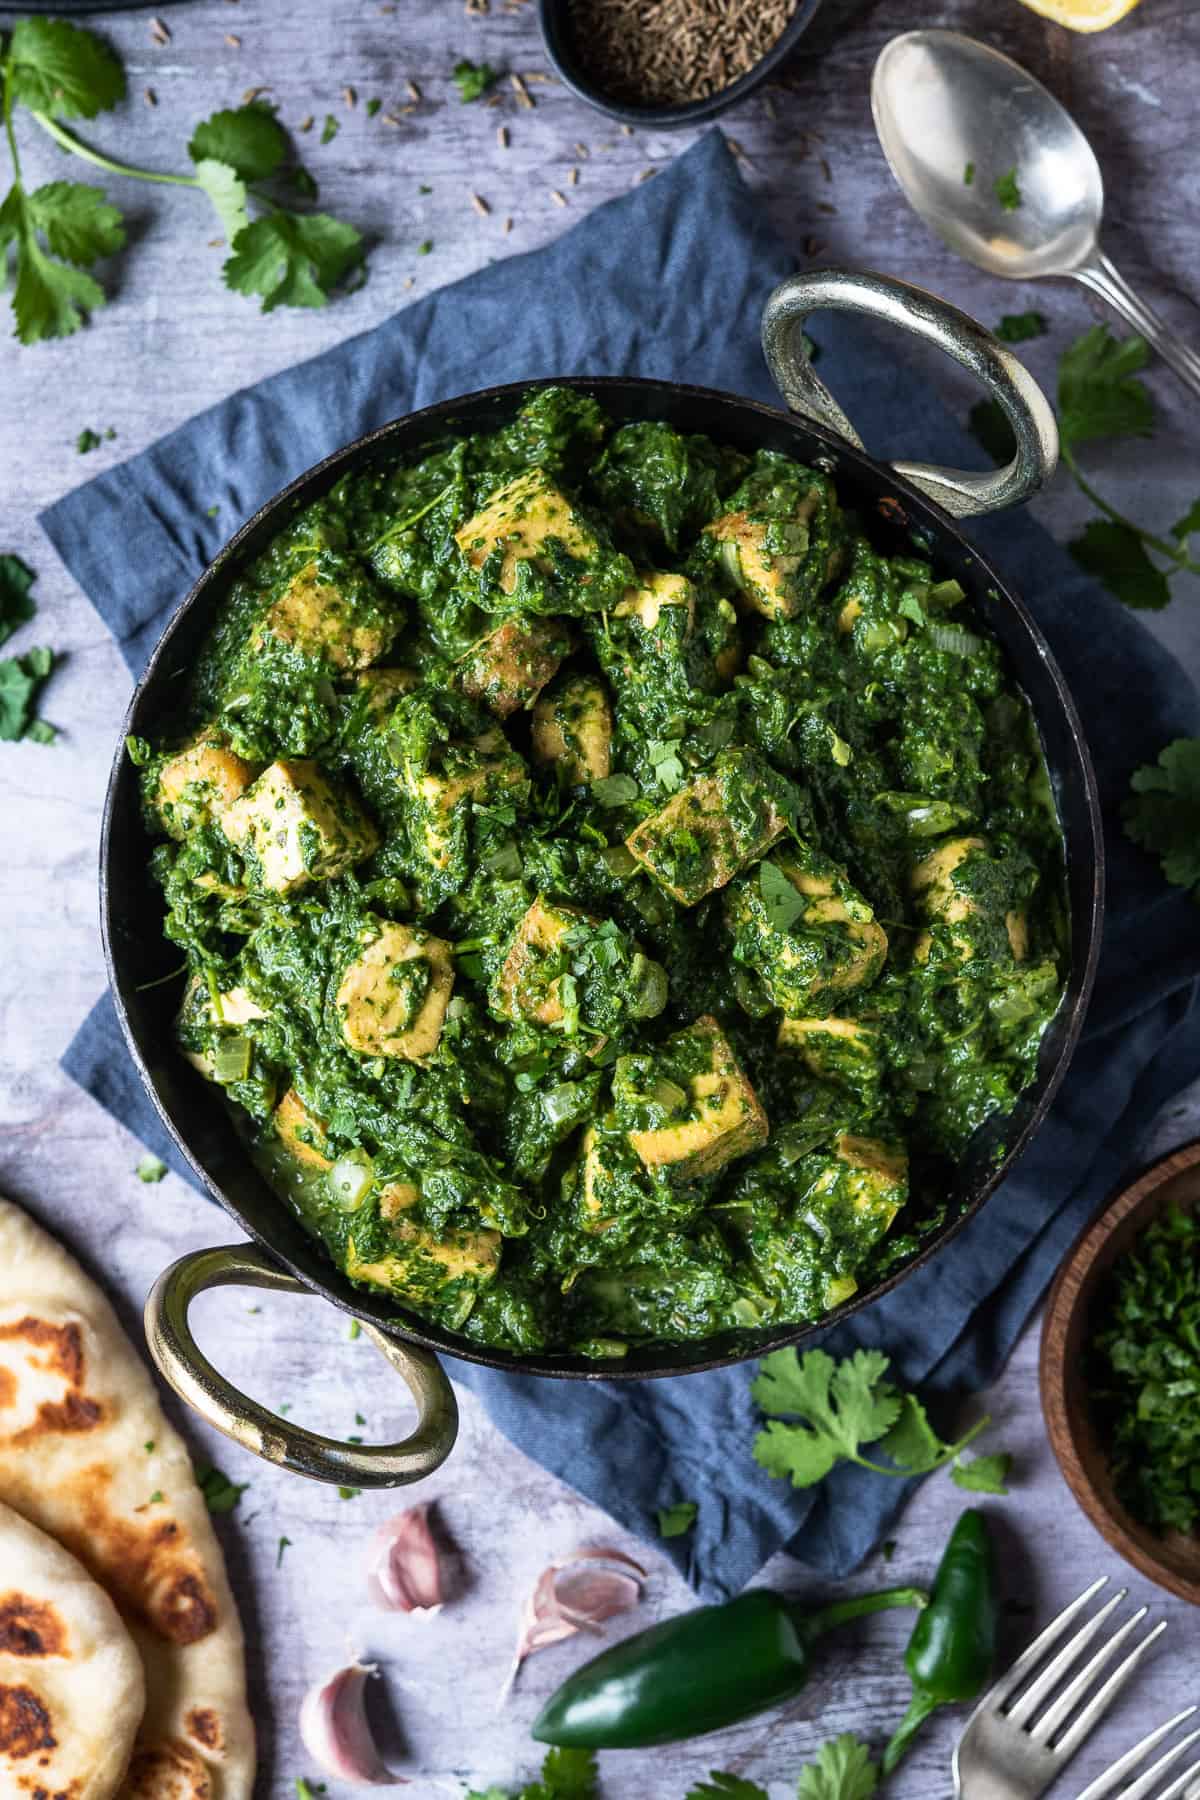 Vegan palak paneer in a kadhai pan on a grey surface surrounded by naan breads, coriander, green chillies and garlic cloves.